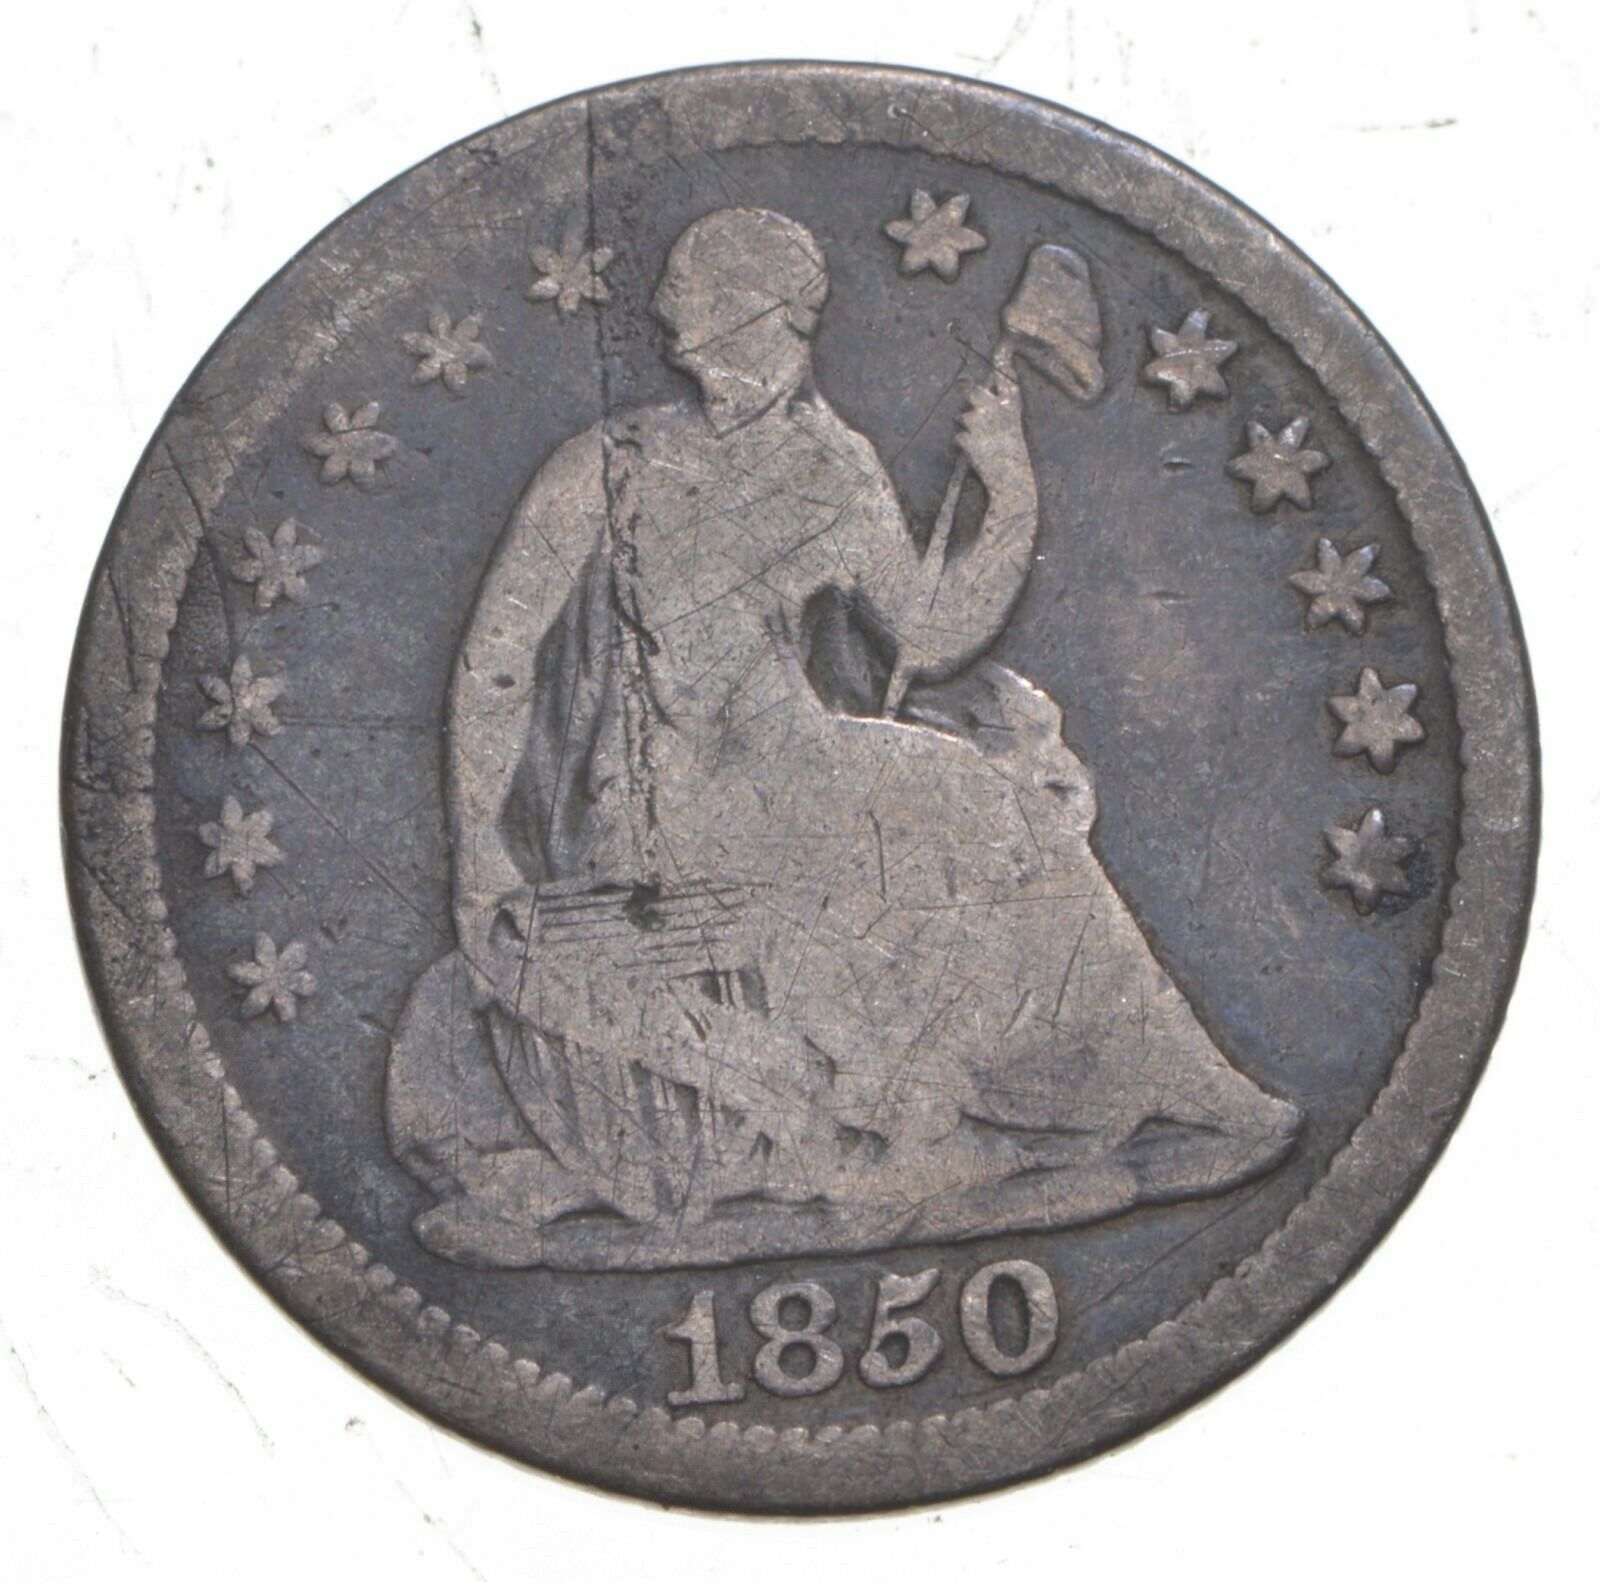 1850 Seated Liberty Half Dime - Walker Coin Collection *283